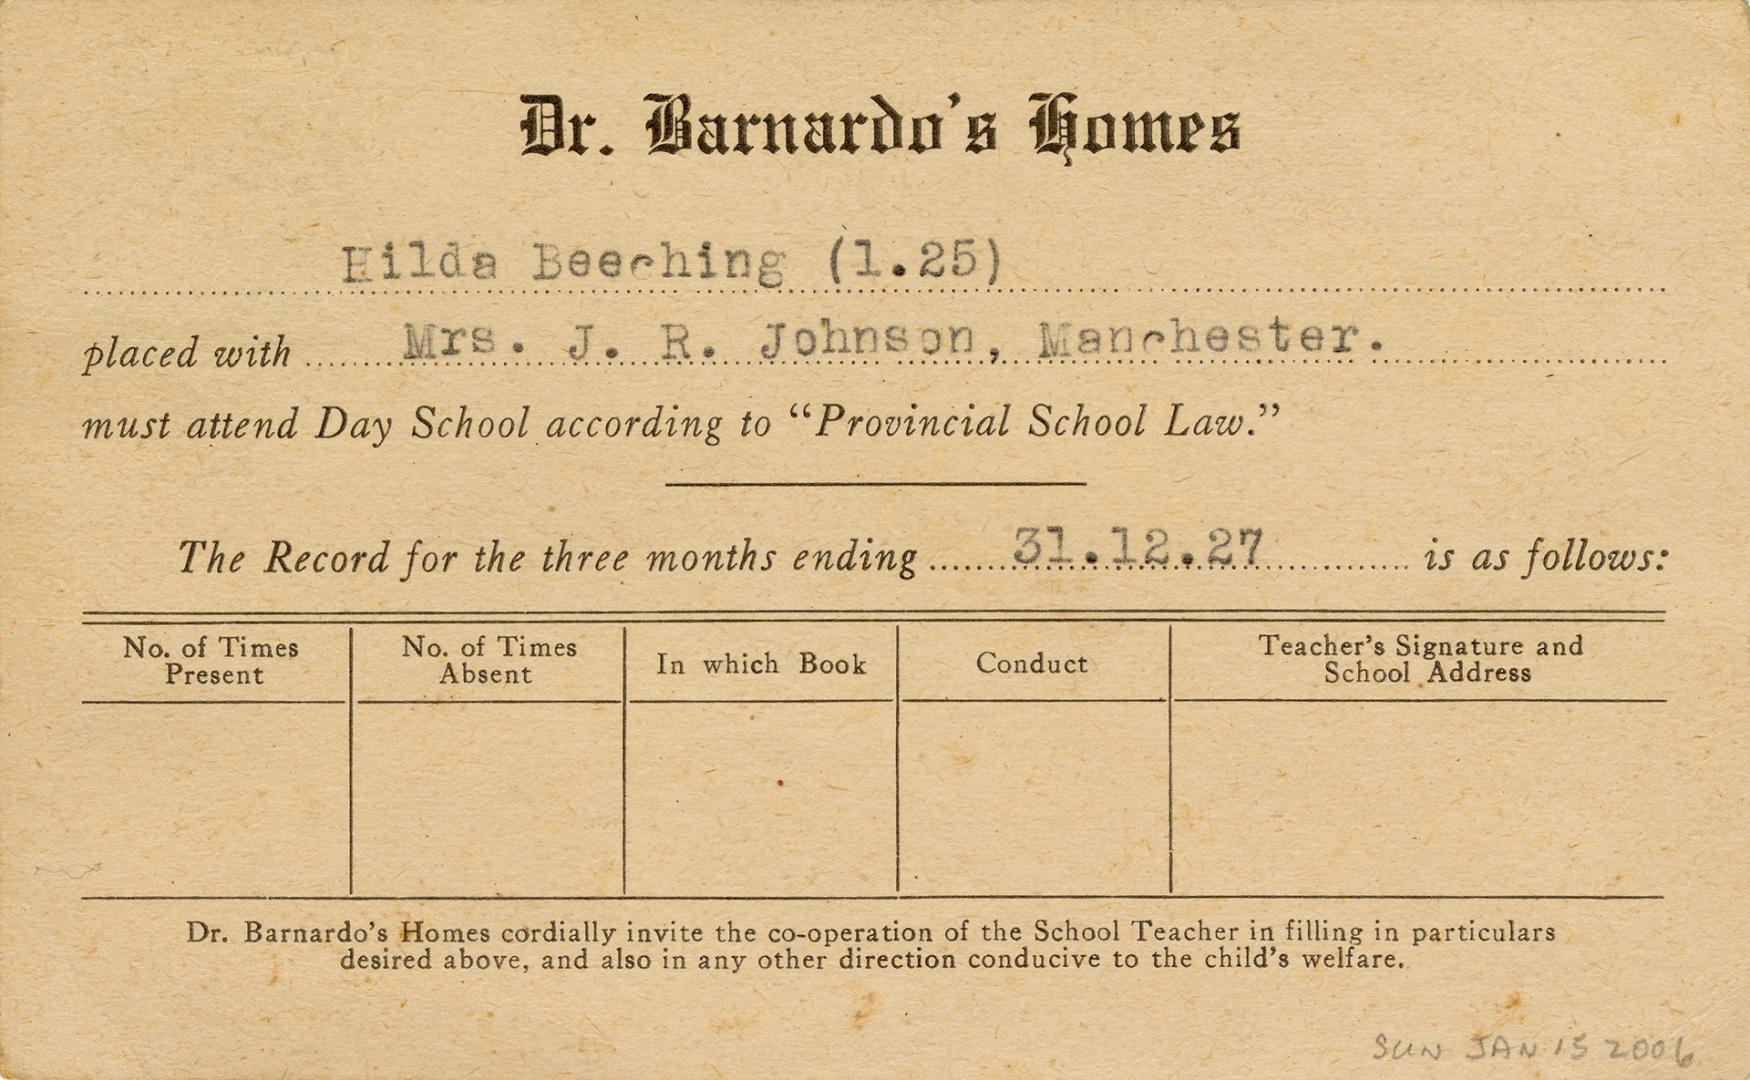 Registration card indicating Eilda Beeching is to be placed with Mrs. J.R. Johnson, Manchester.